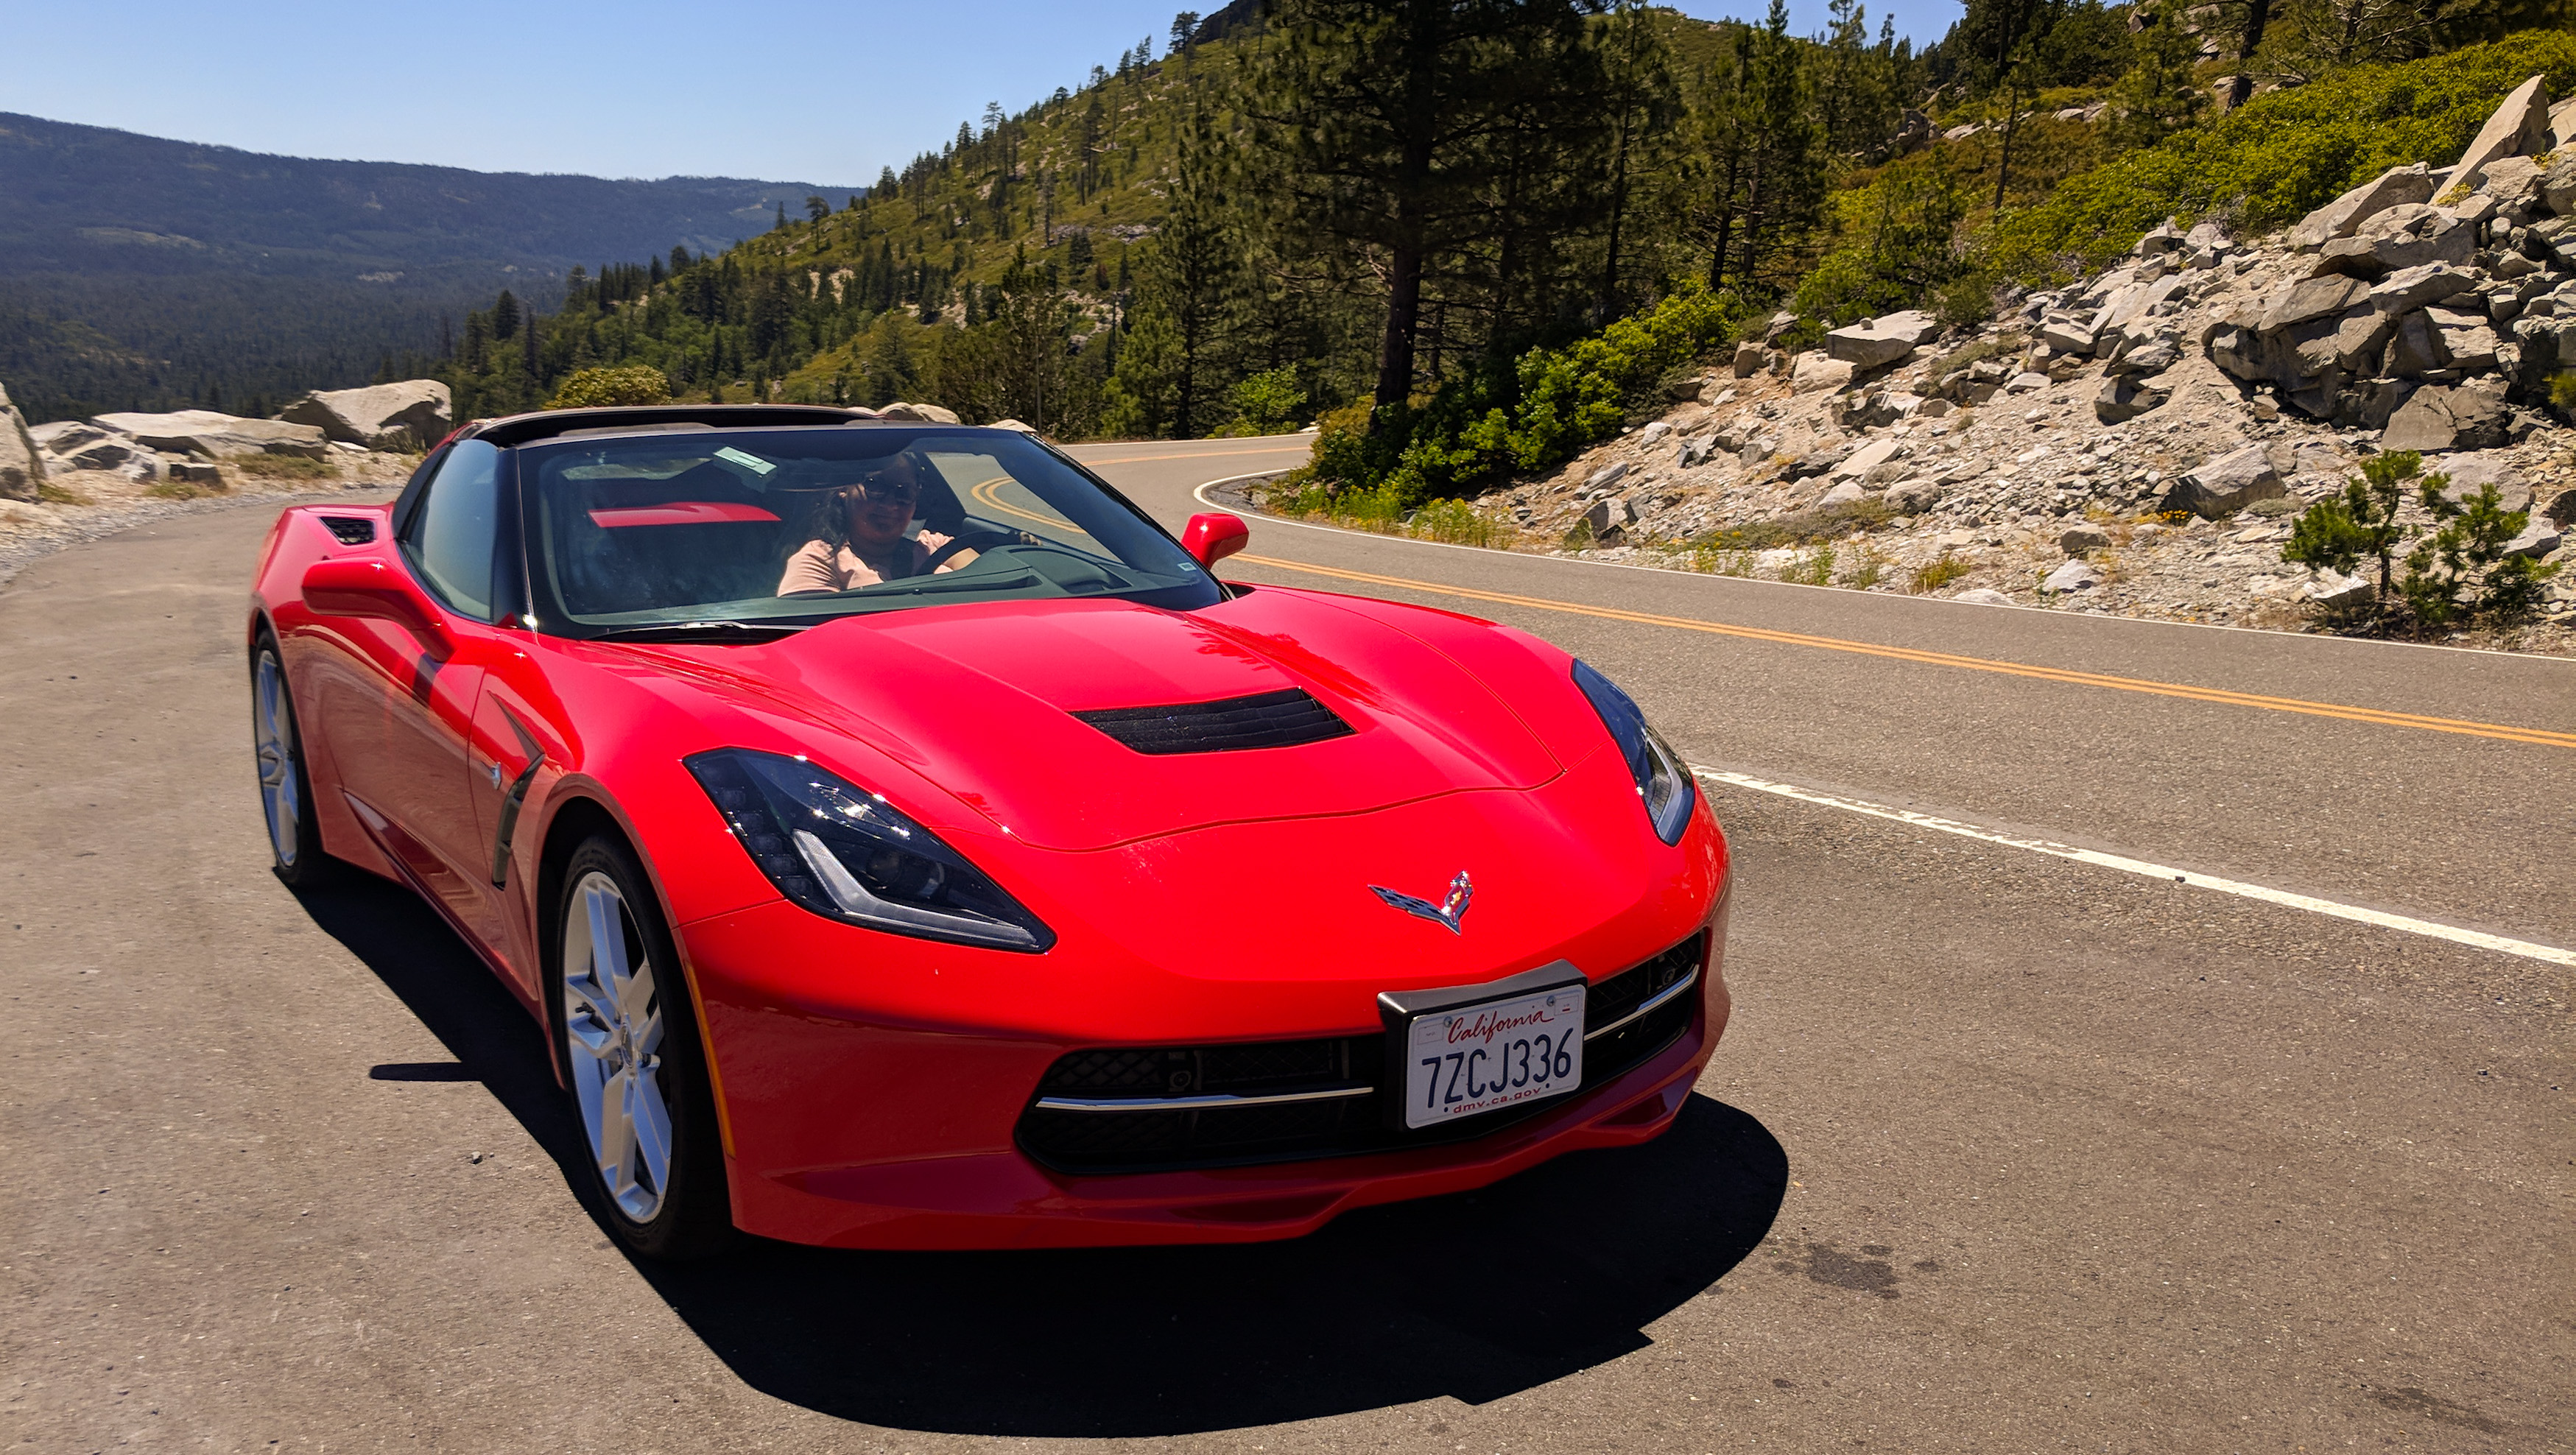 The car that changed me – the Corvette Stingray